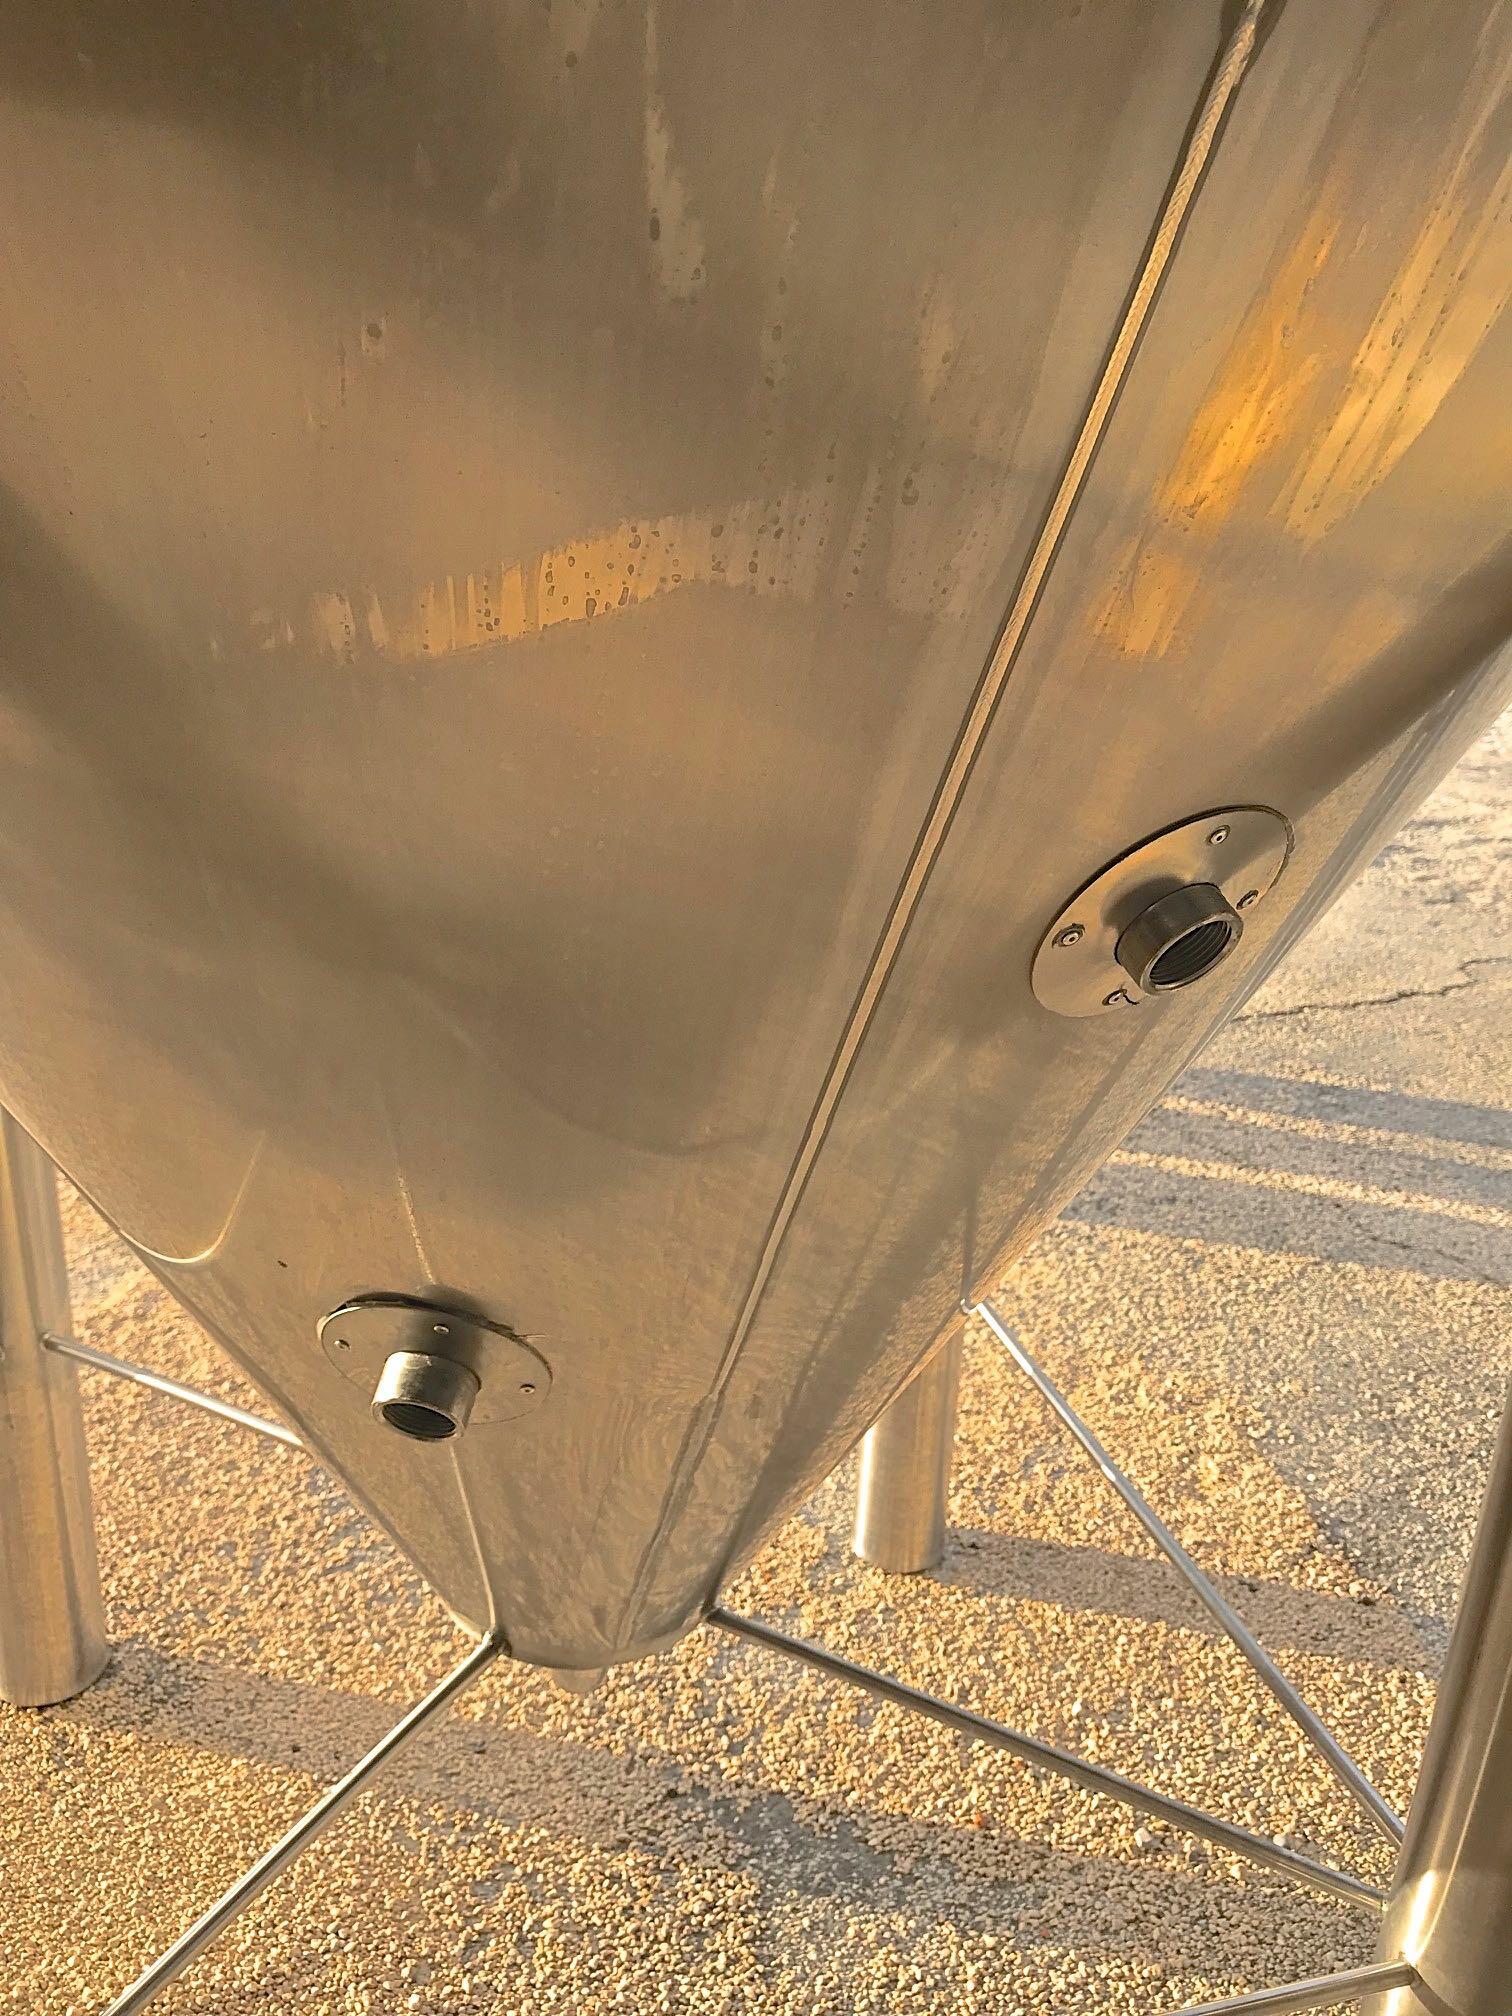 Insulated tank on 304 stainless steel - Cylindro-conical